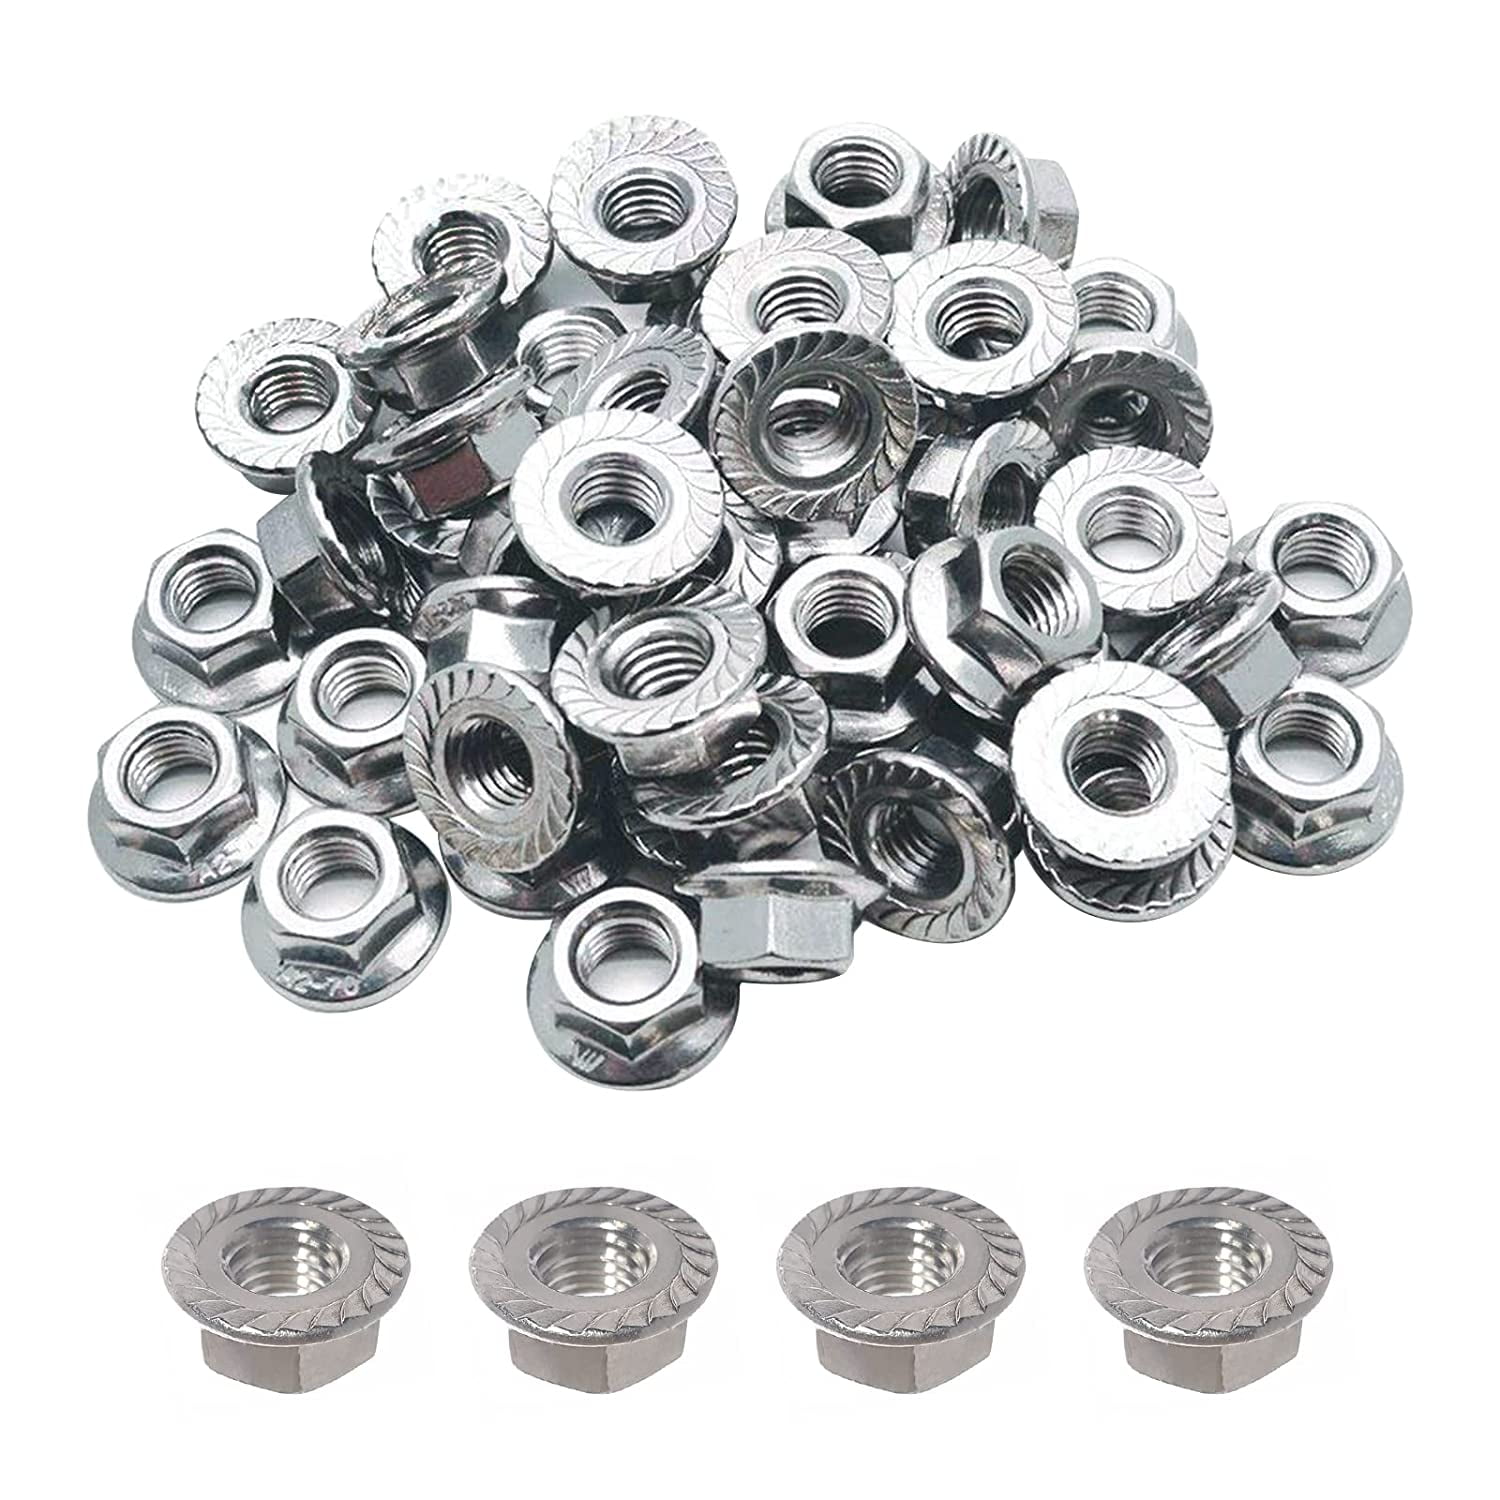 1/4-20 Serrated Flange Hex Lock Nuts Bright Finish Stainless Steel 304 50 PCS 